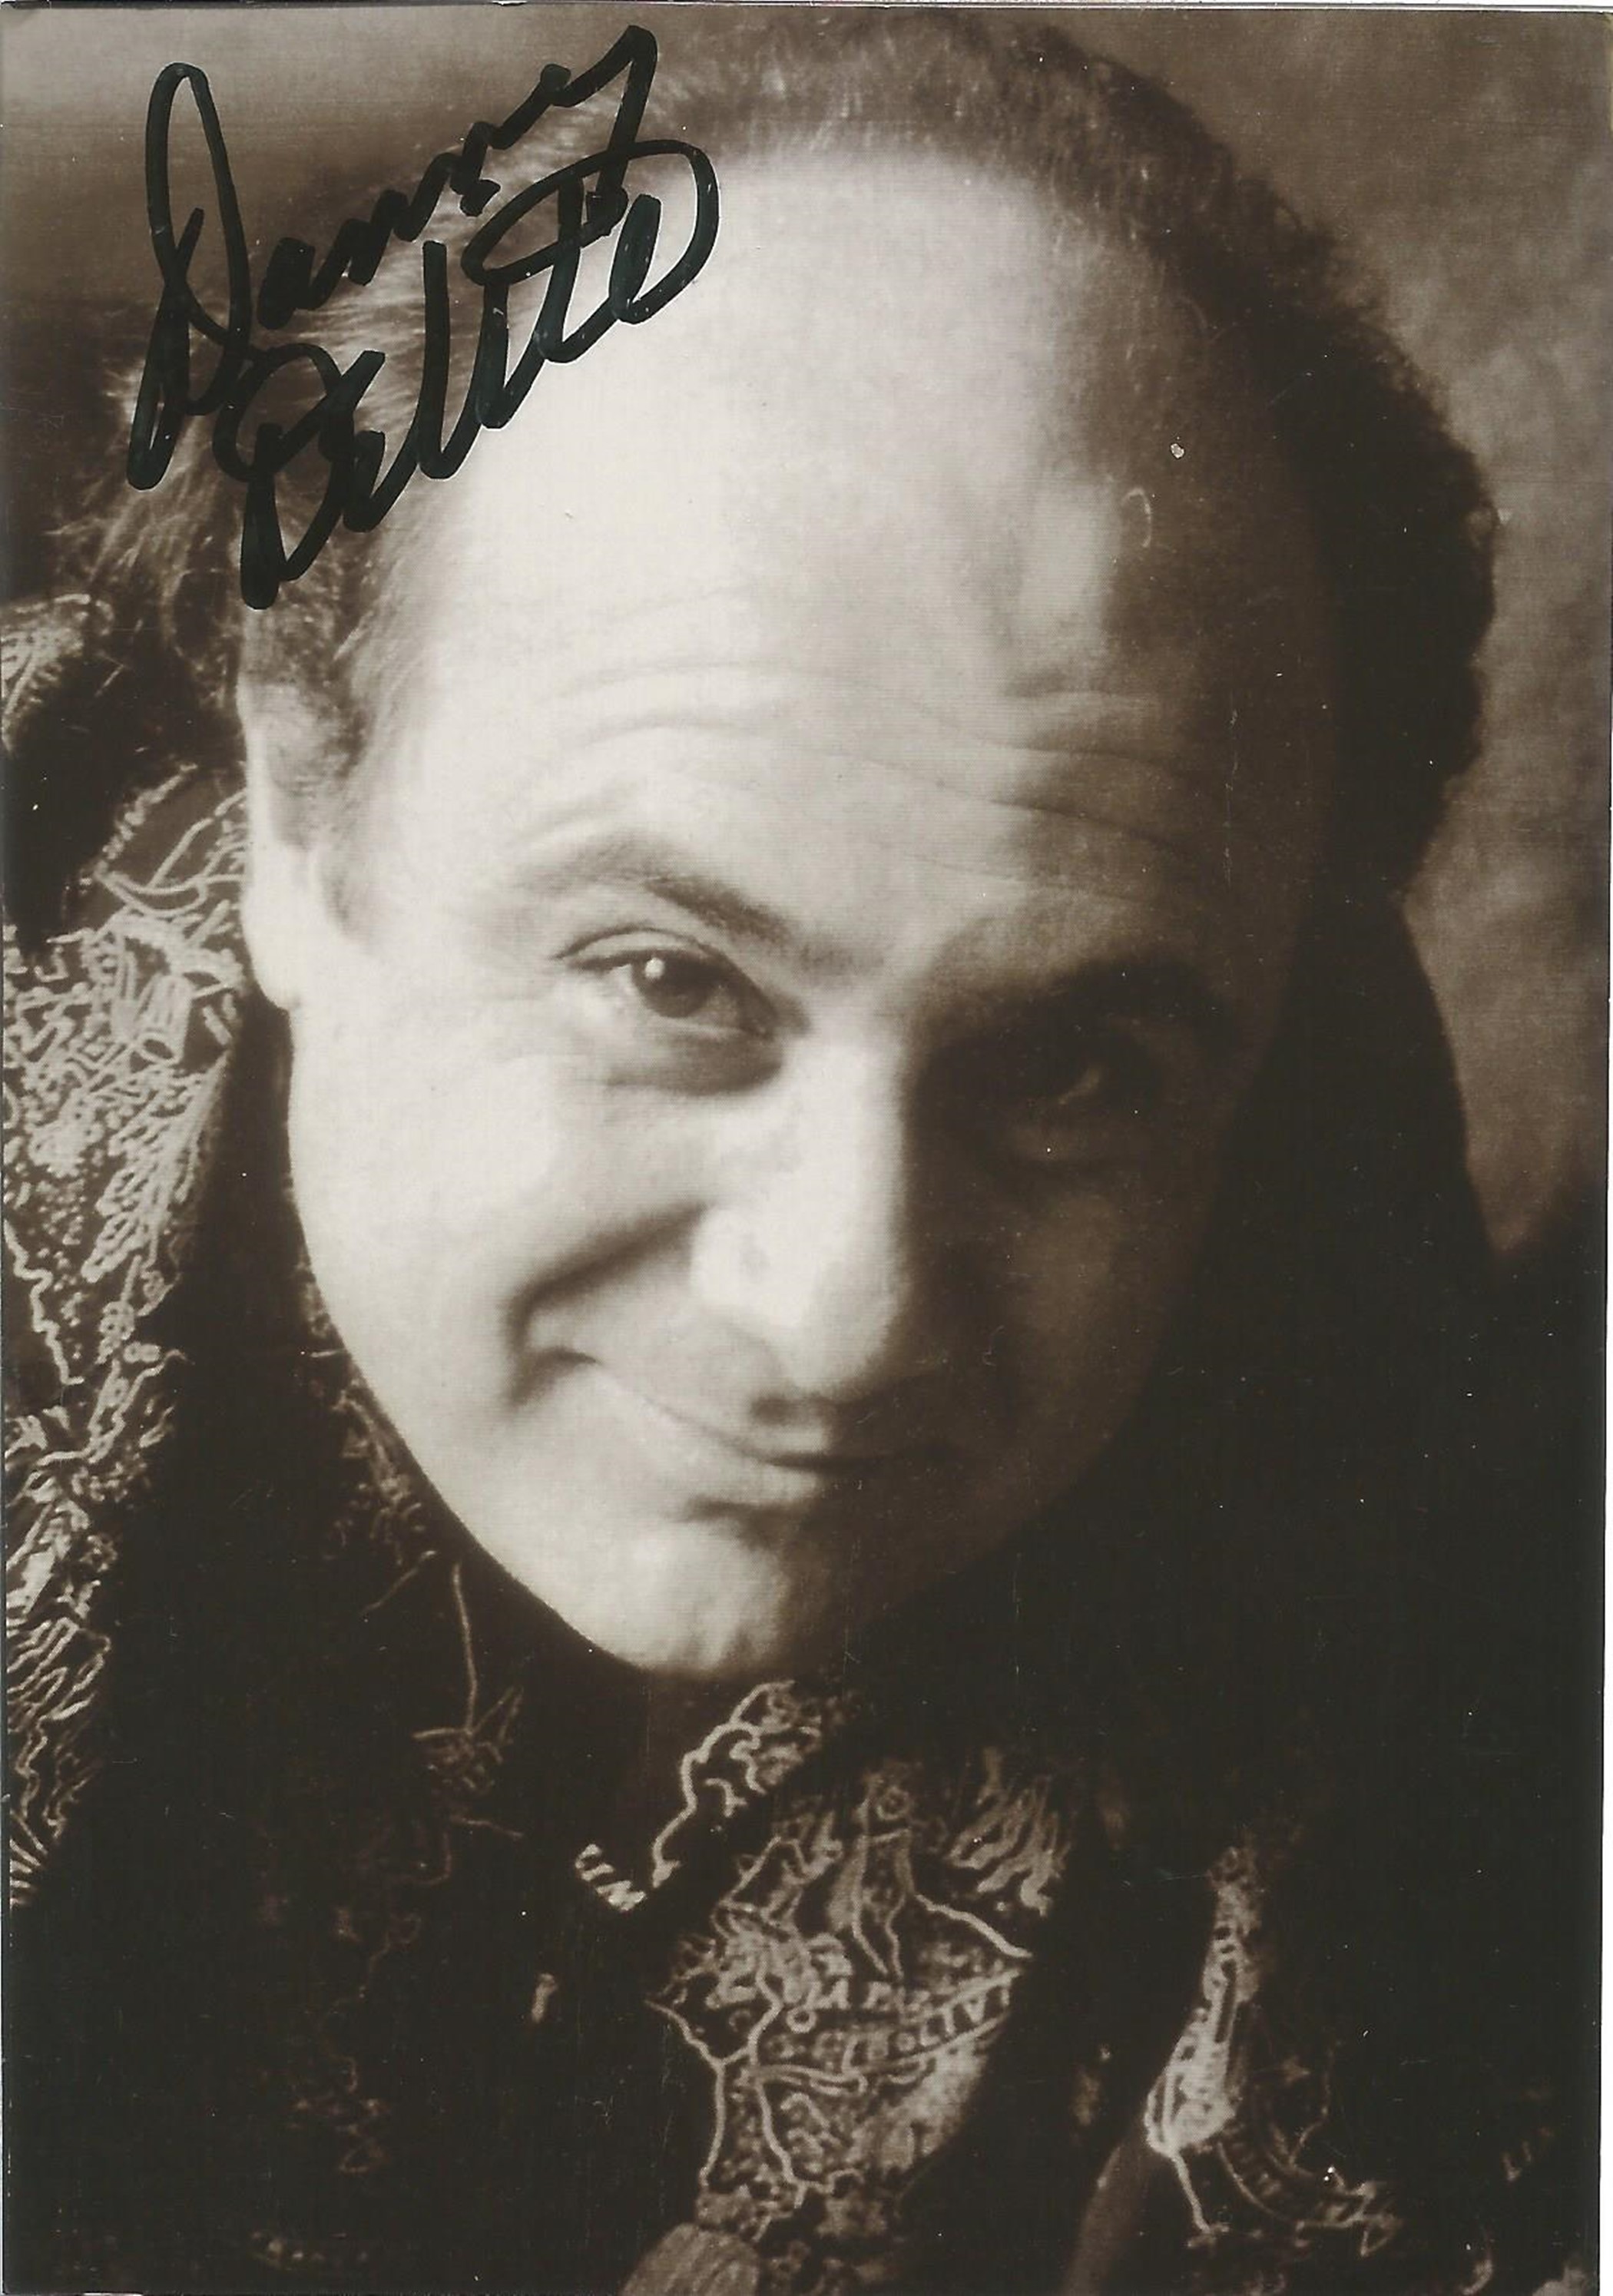 Danny De Vito signed 6x4 black and white photo. American actor, director, producer, and